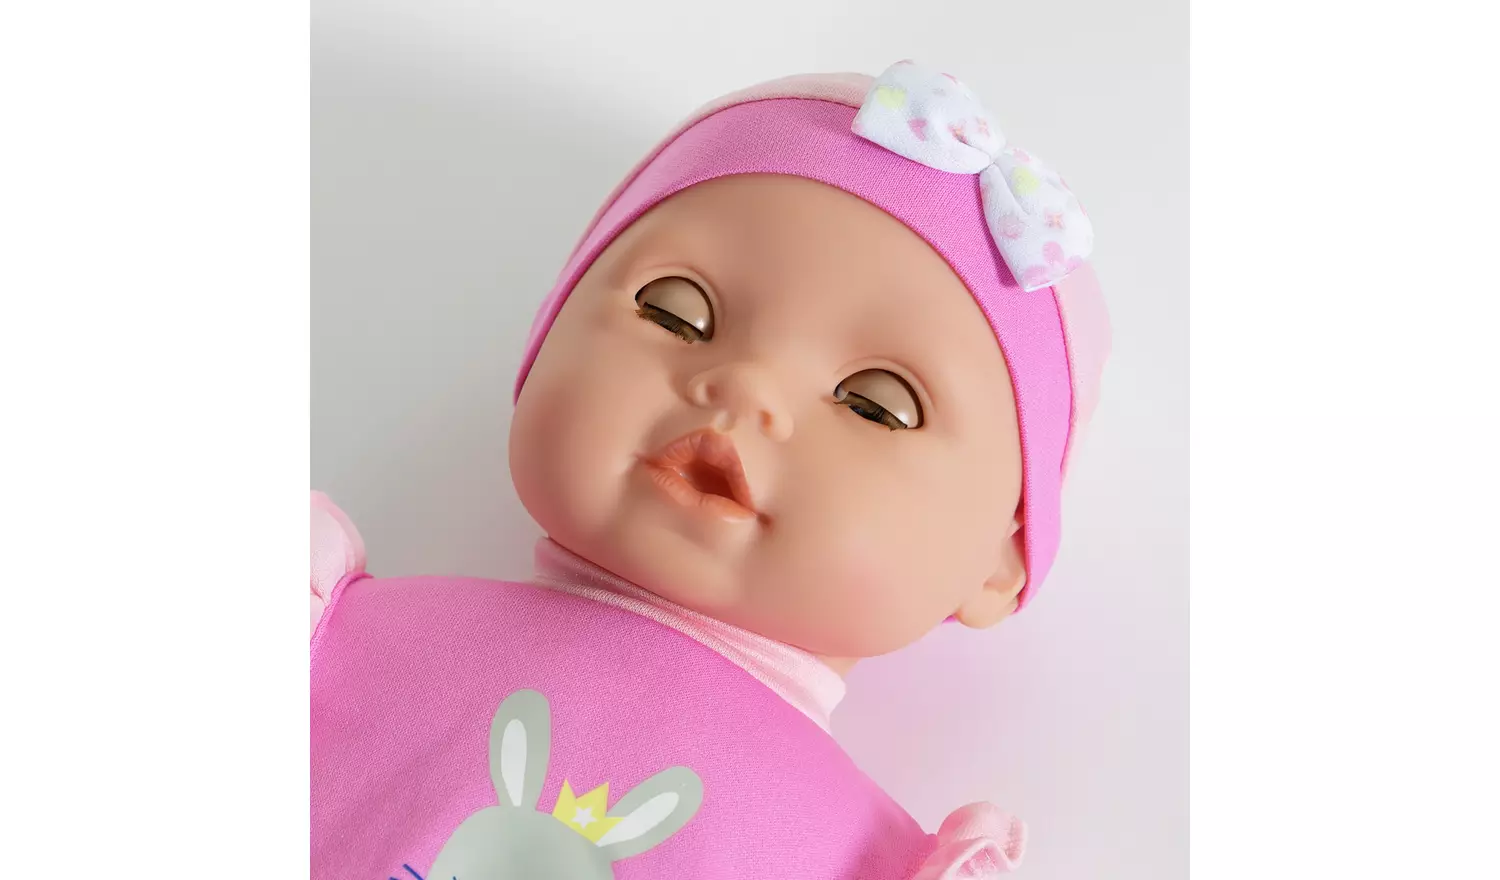 Chad Valley Babies to Love Cuddly Ava Doll - 15inch/40cm